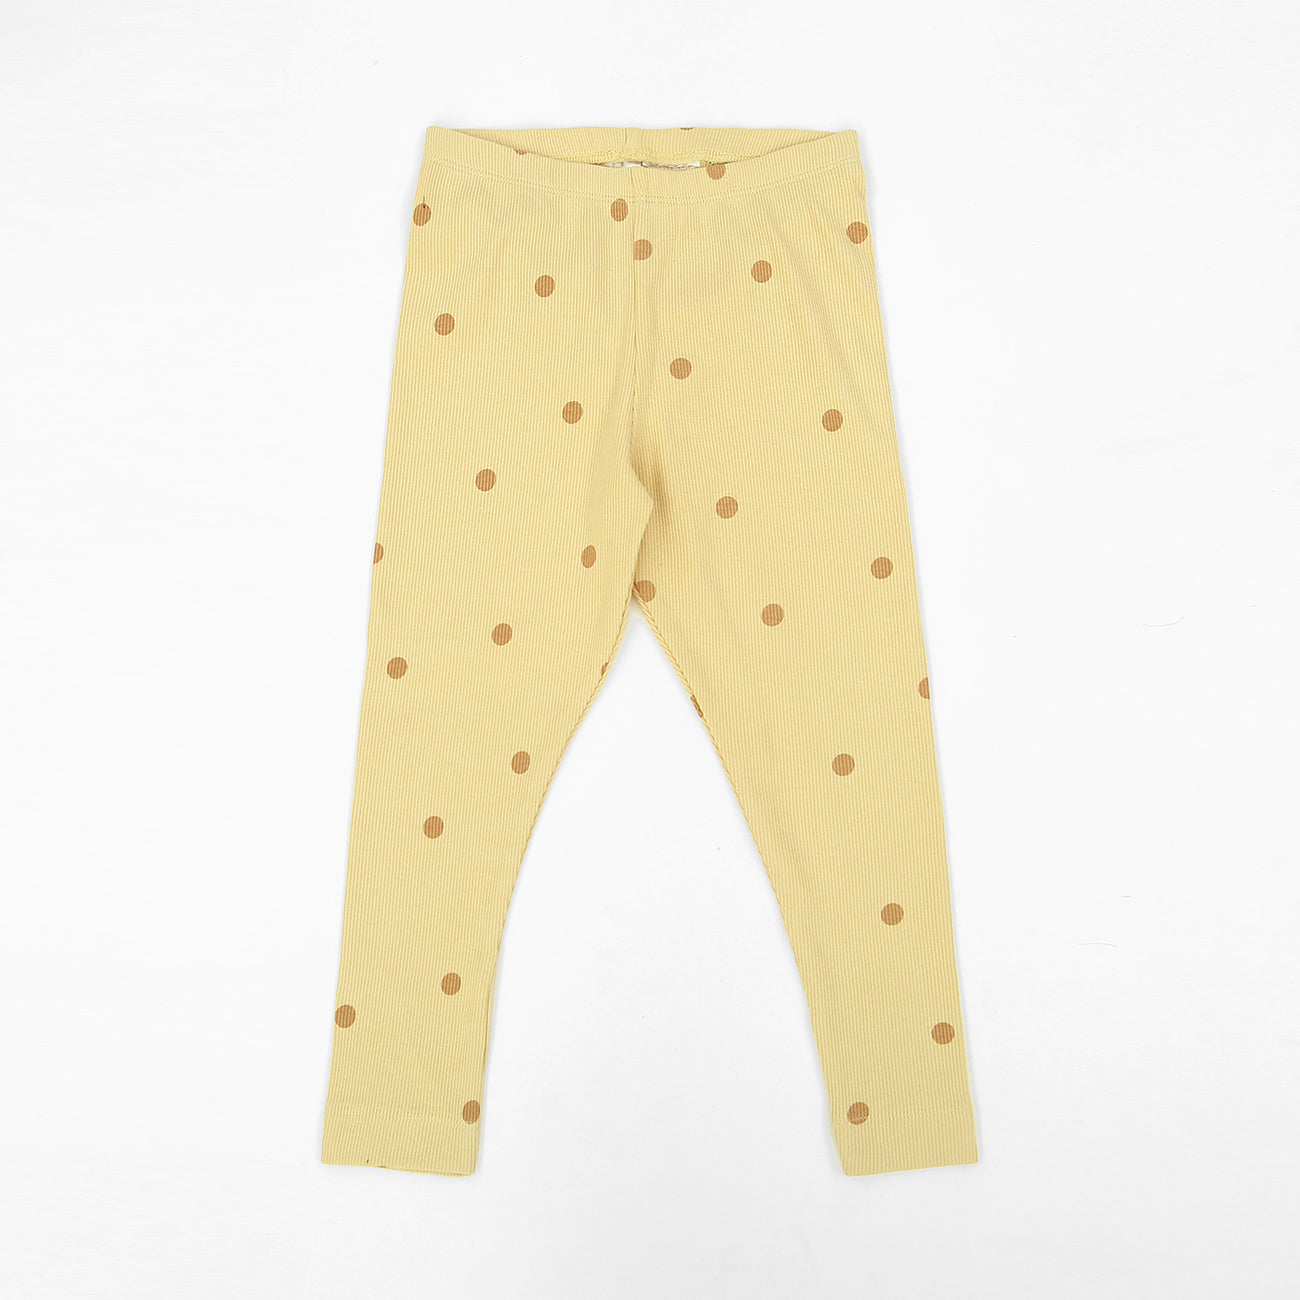 Imported Polka Doted Printed Soft Cotton Rib Legging For Girls (11575)